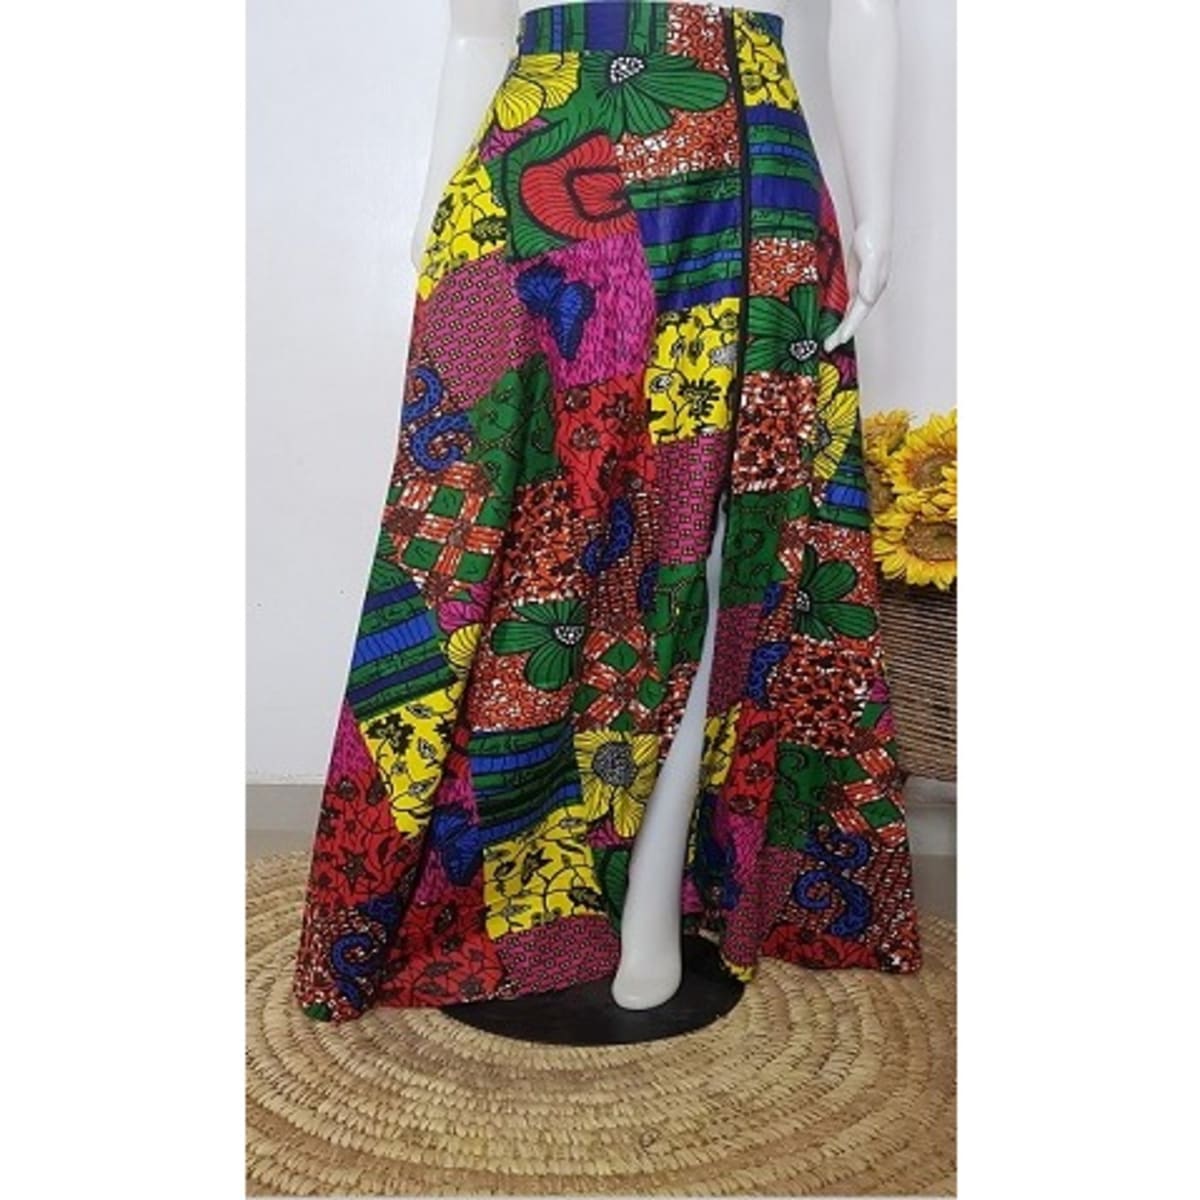 Latest Ankara Skirt and Blouse Styles in 2022 and 2023  Kaybee Fashion  Styles